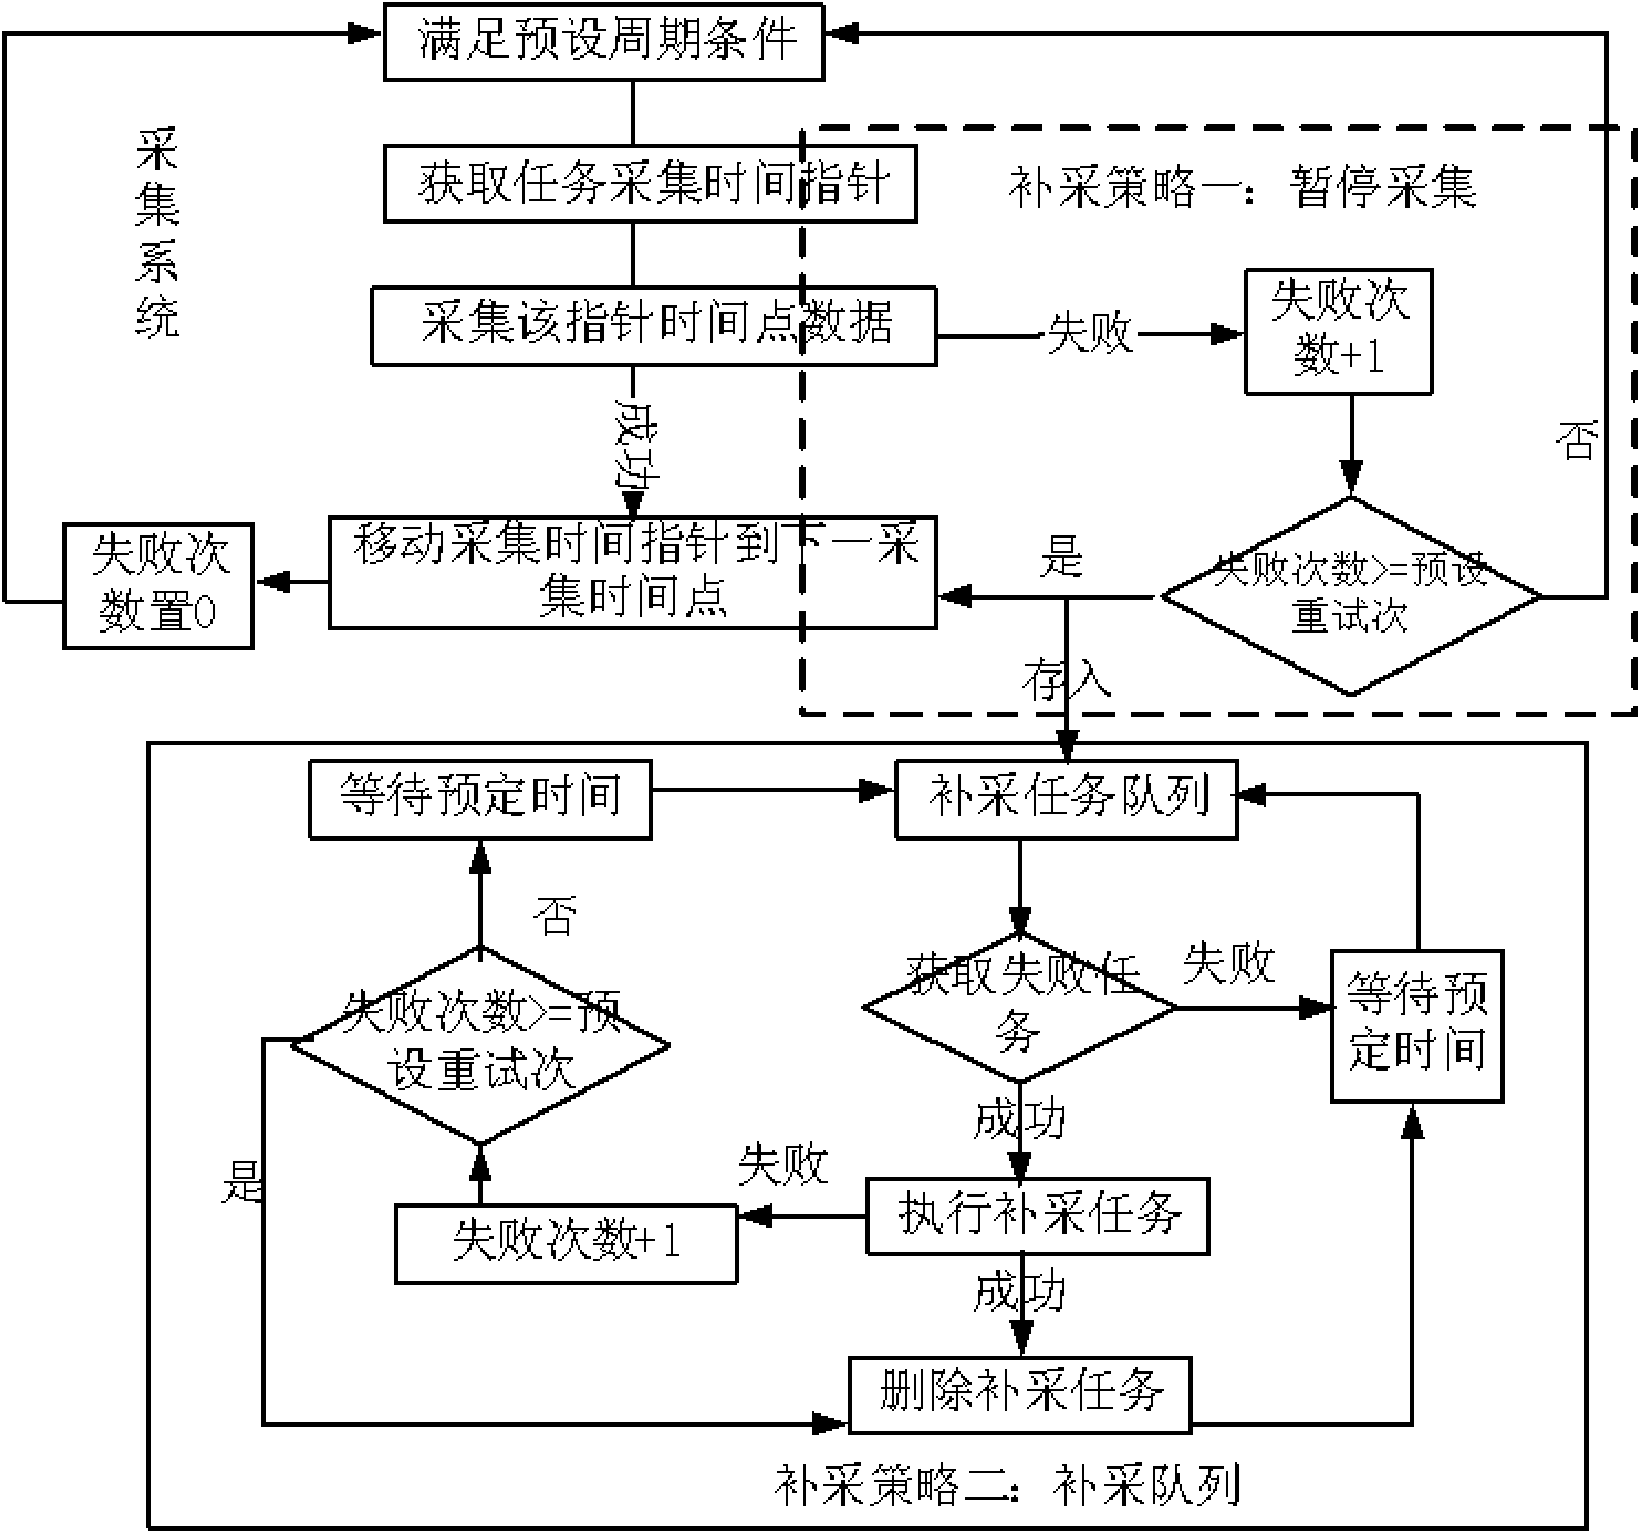 Method and system of data acquisition from data acquisition terminal